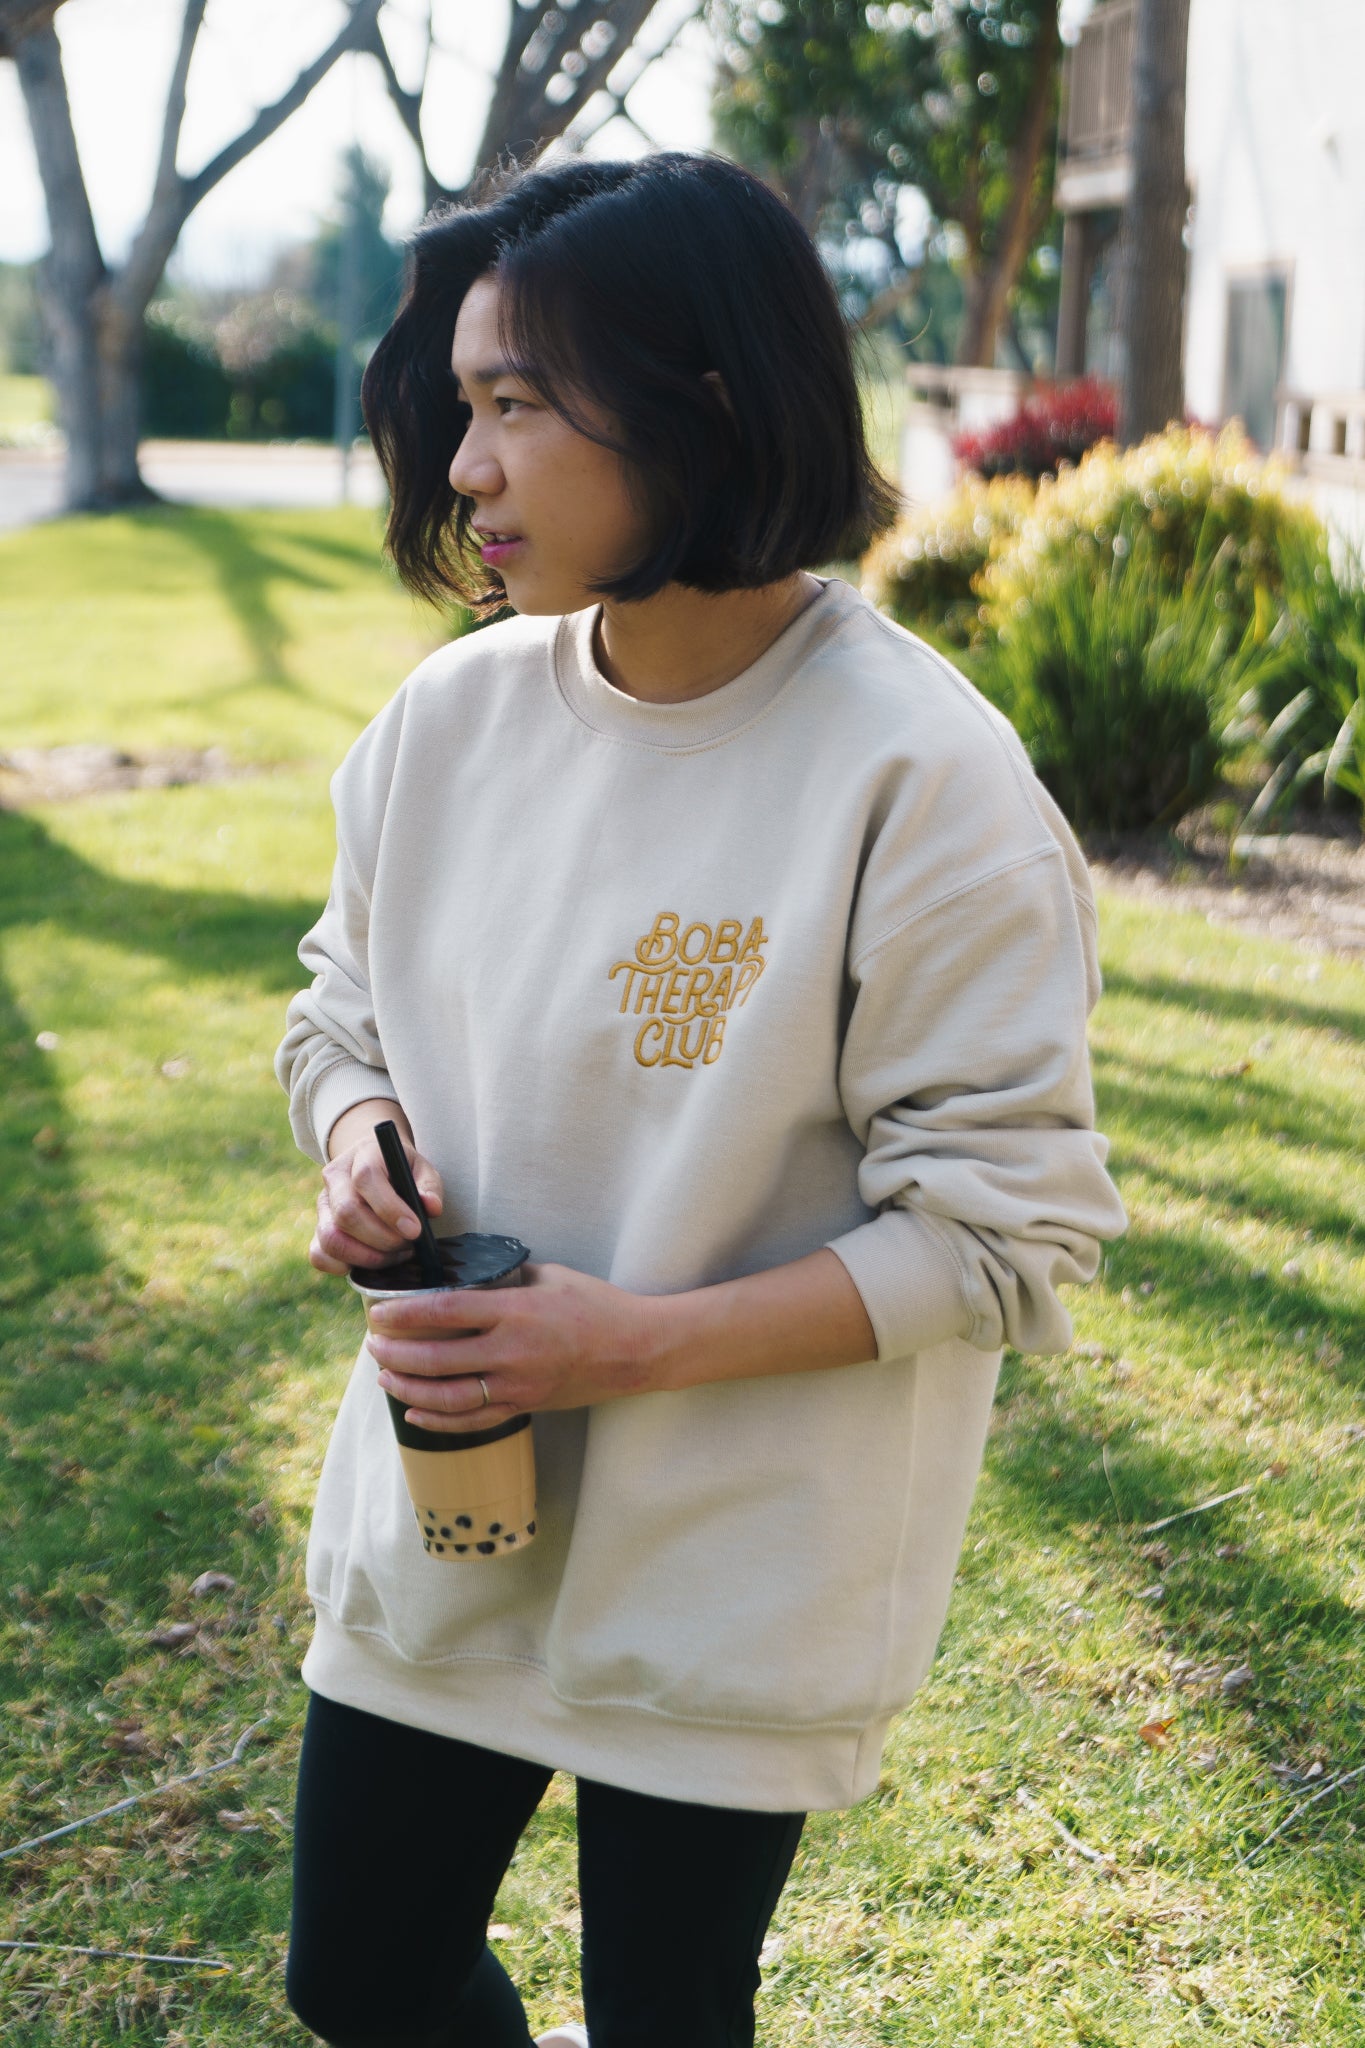 Boba Therapy Club Embroidered Crewneck (Roasted Oolong)